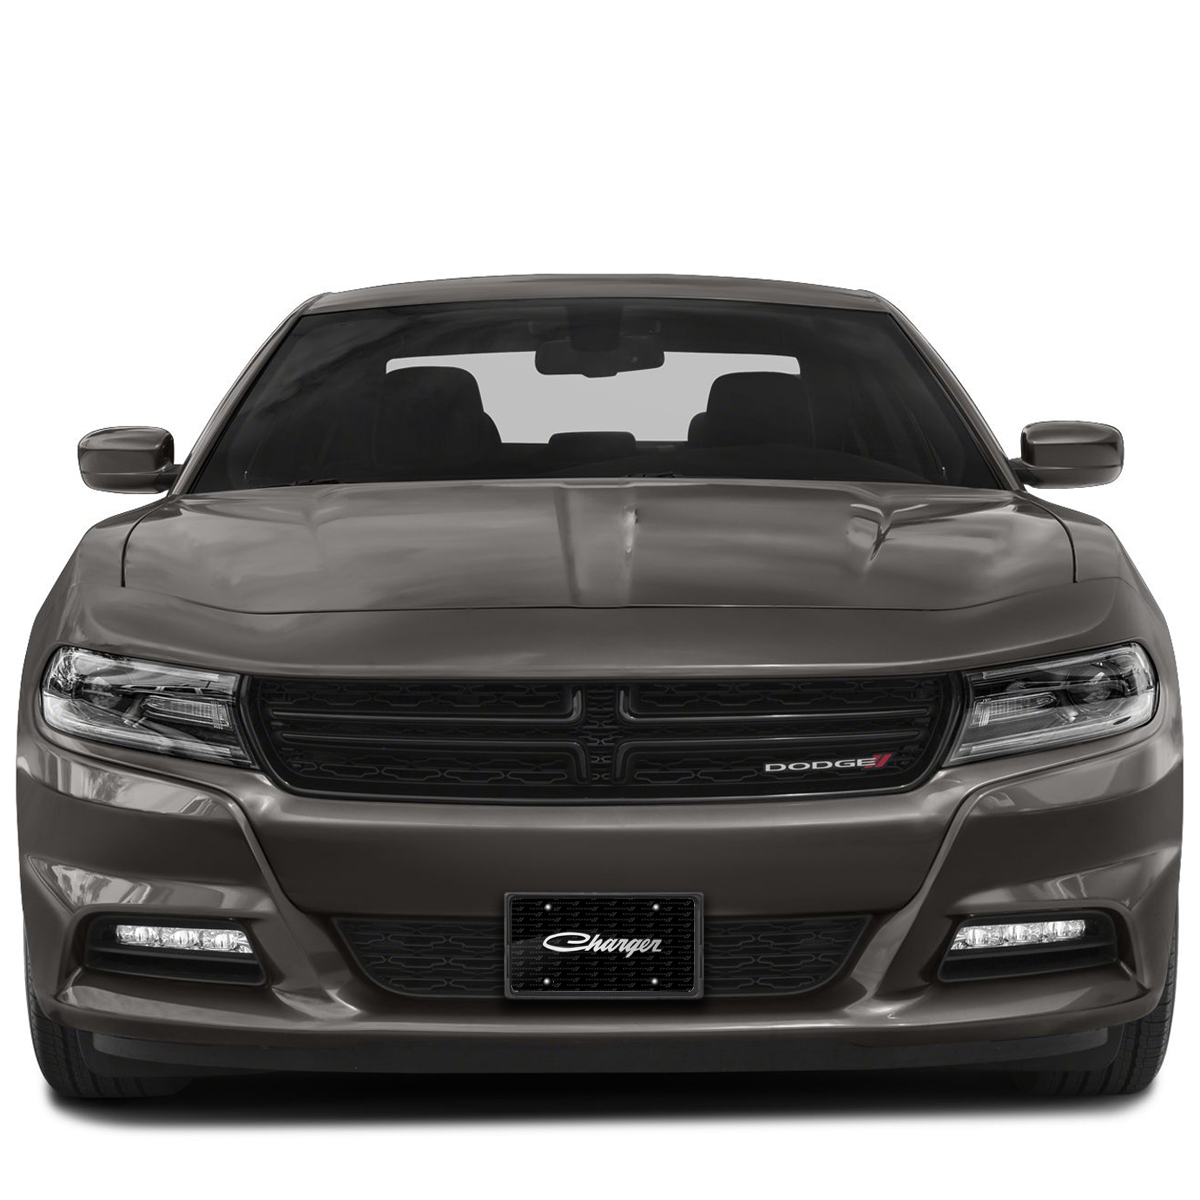 Dodge Charger Classic 3D Logo on Logo Pattern Black Aluminum License Plate - image 4 of 6